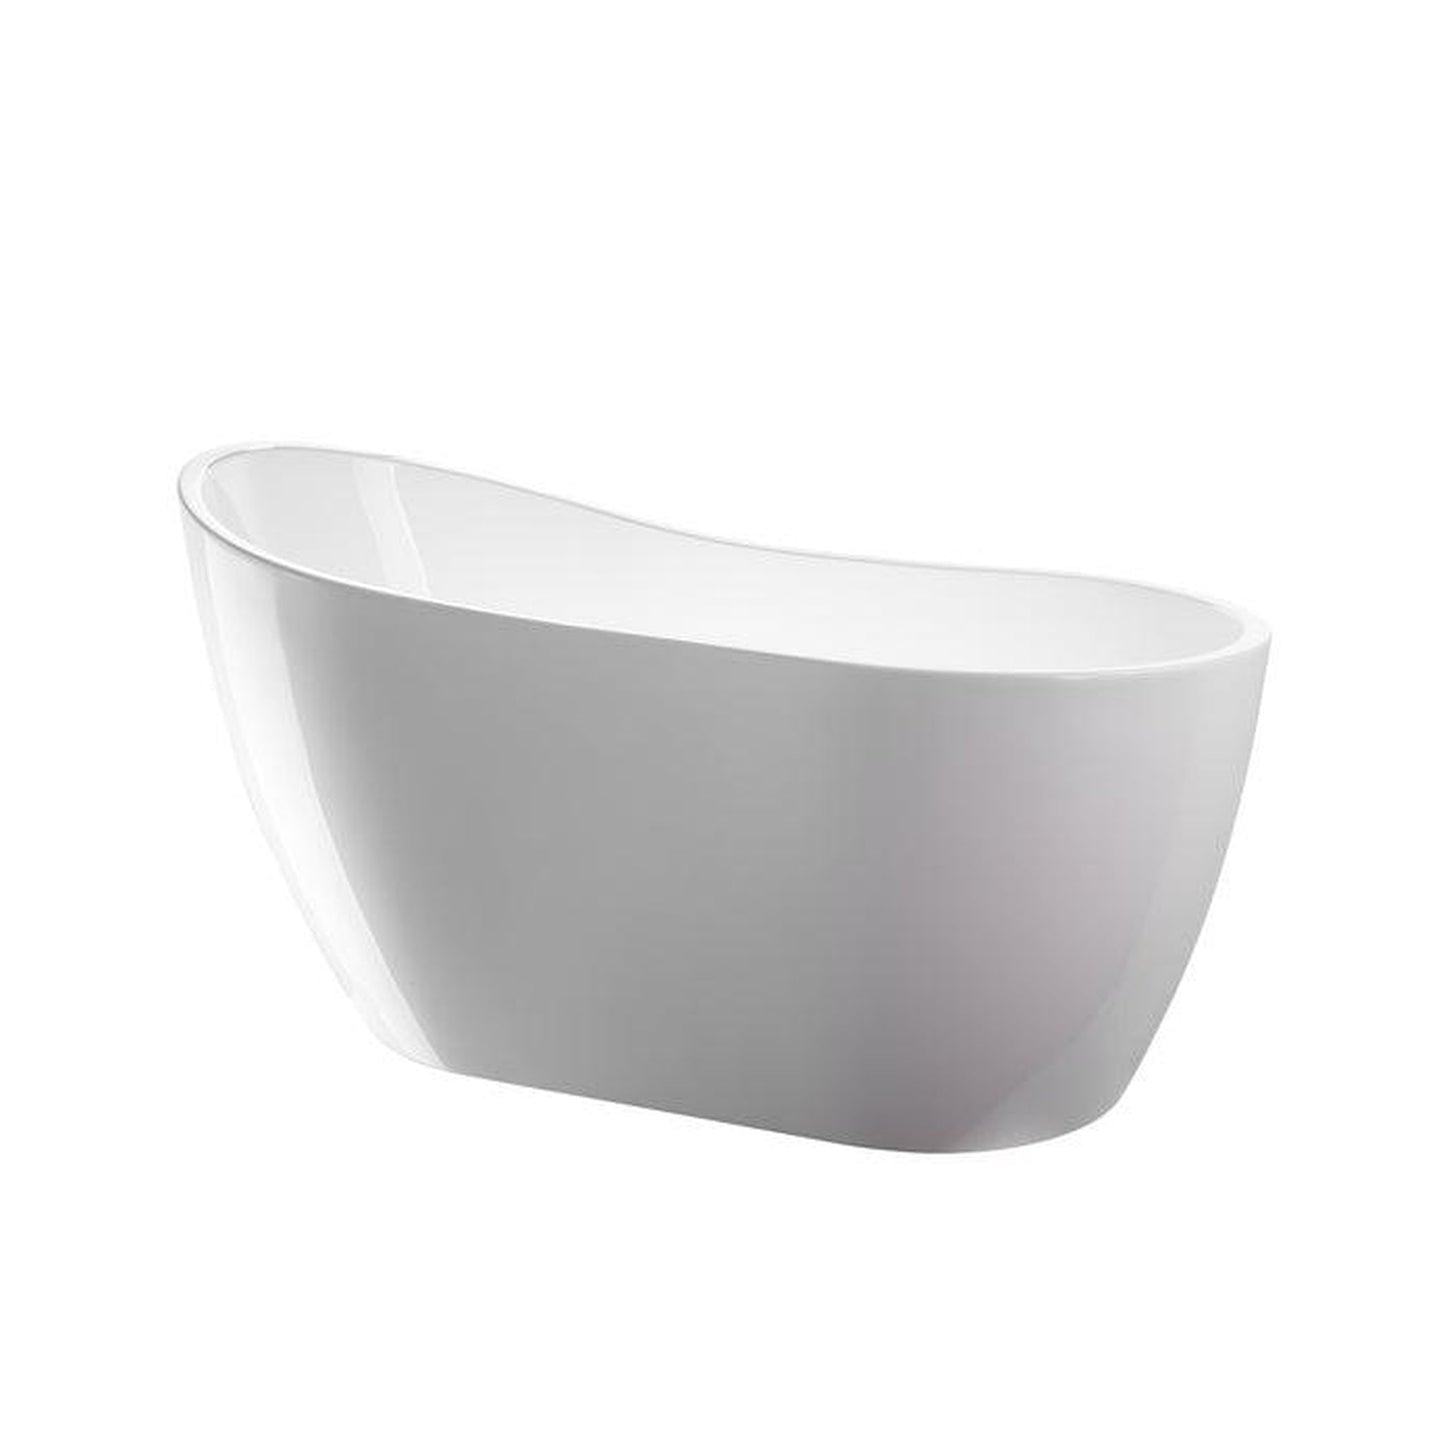 Vanity Art 54" W x 28" H White Acrylic Modern Freestanding Bathtub With Polished Chrome Pop-up Drain and Slotted Overflow